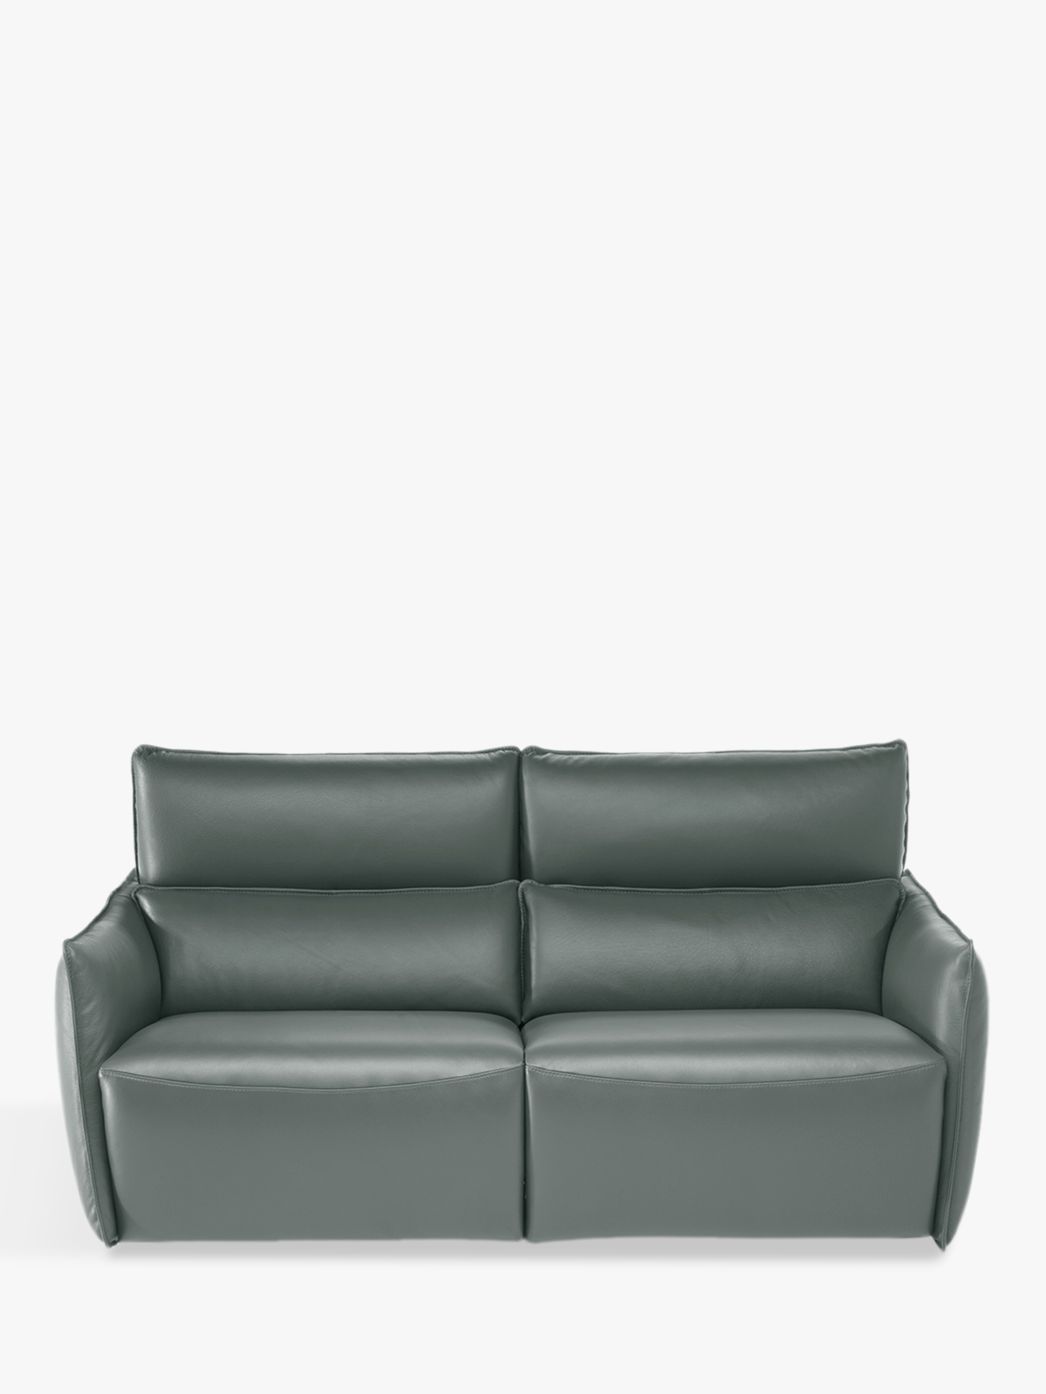 Natuzzi Stupore 193 Leather Loveseat With Power Motion Review